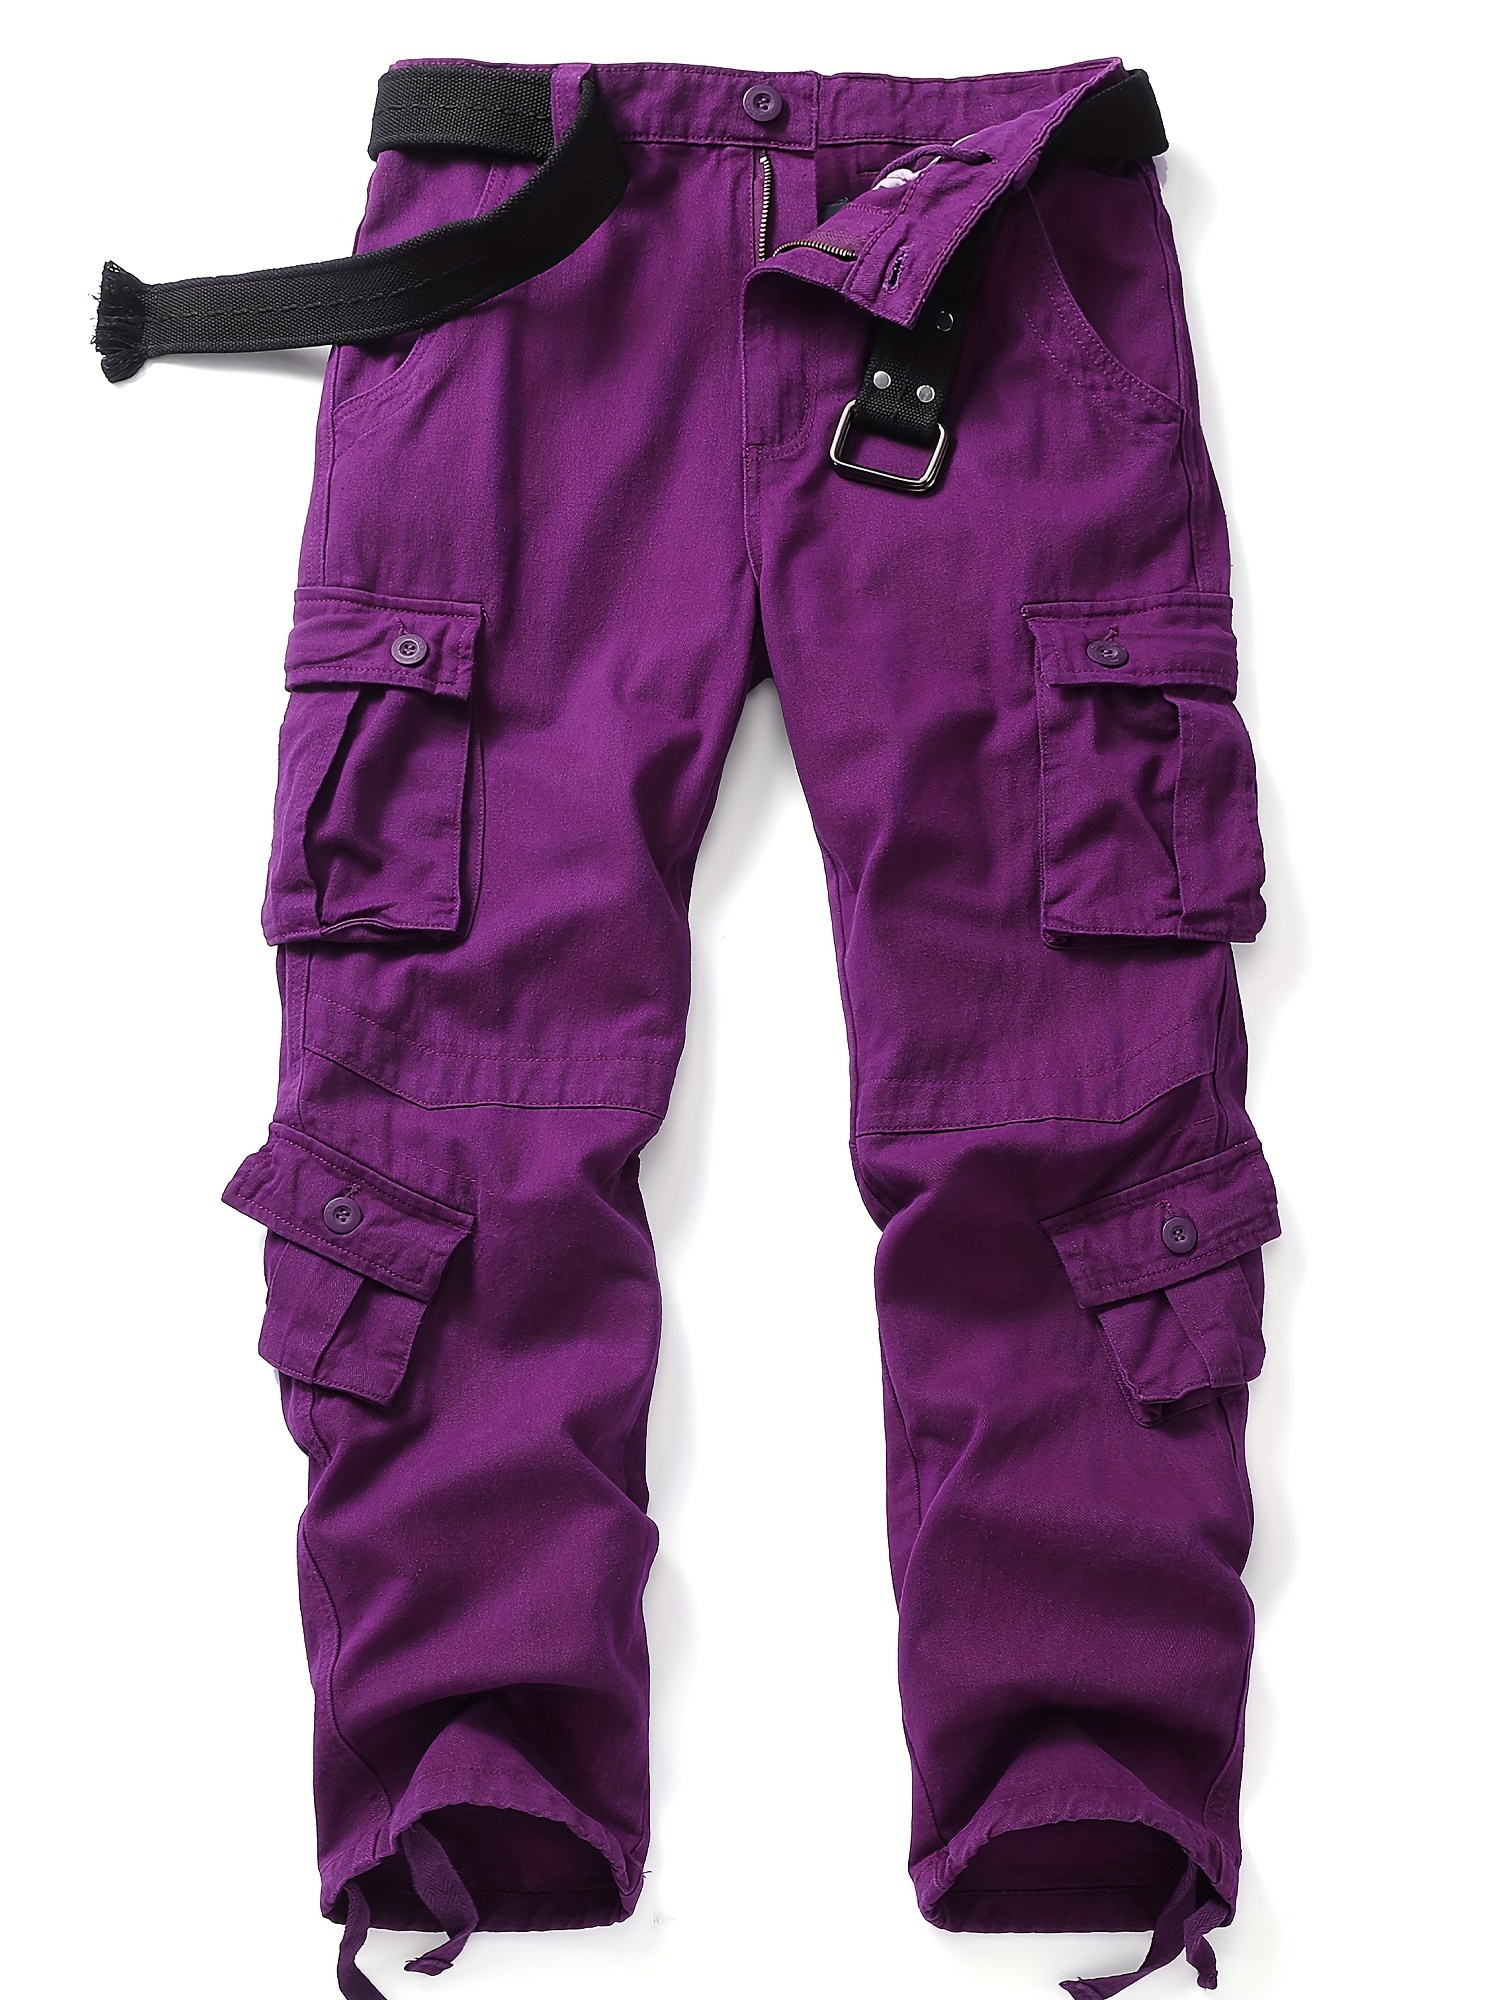 Womens Cargo Combat Work Trousers Ladies Pocket Casual Cropped